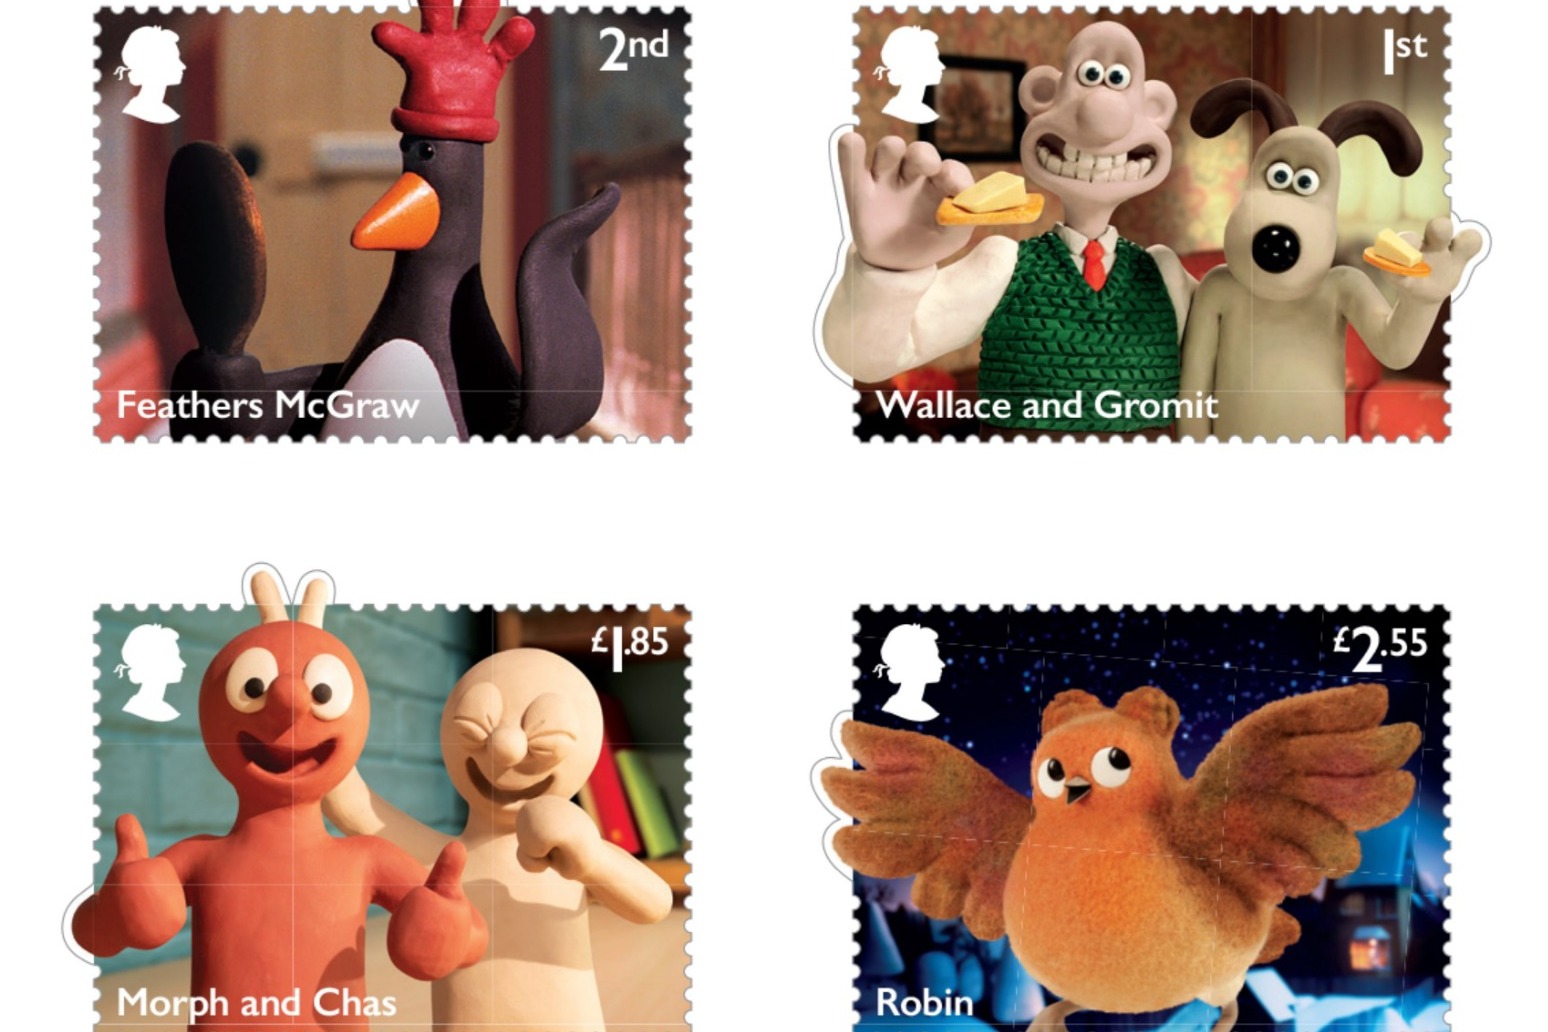 Wallace and Gromit and Morph among familiar faces on new Royal Mail stamps 